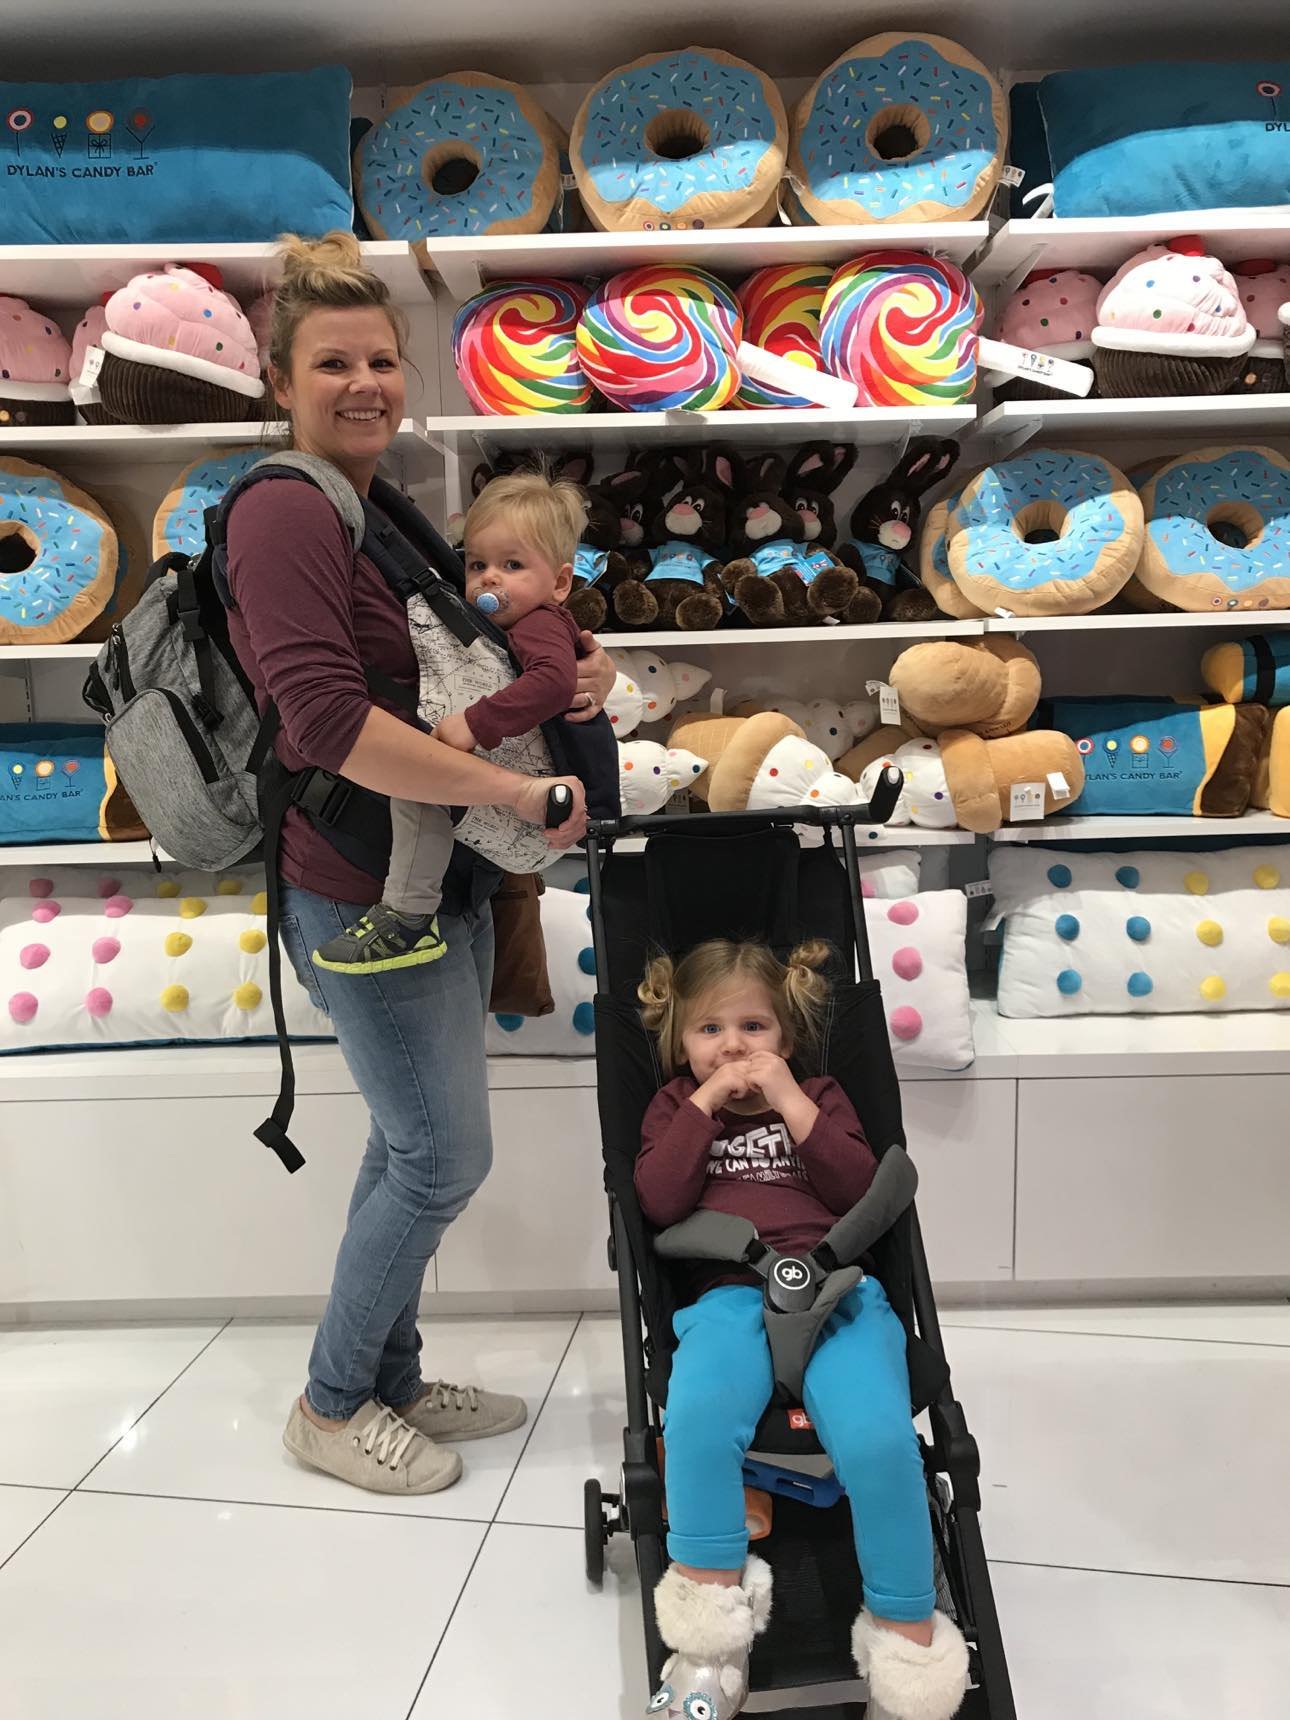 Traveling with a toddler: ideas, tips and items for your next trip